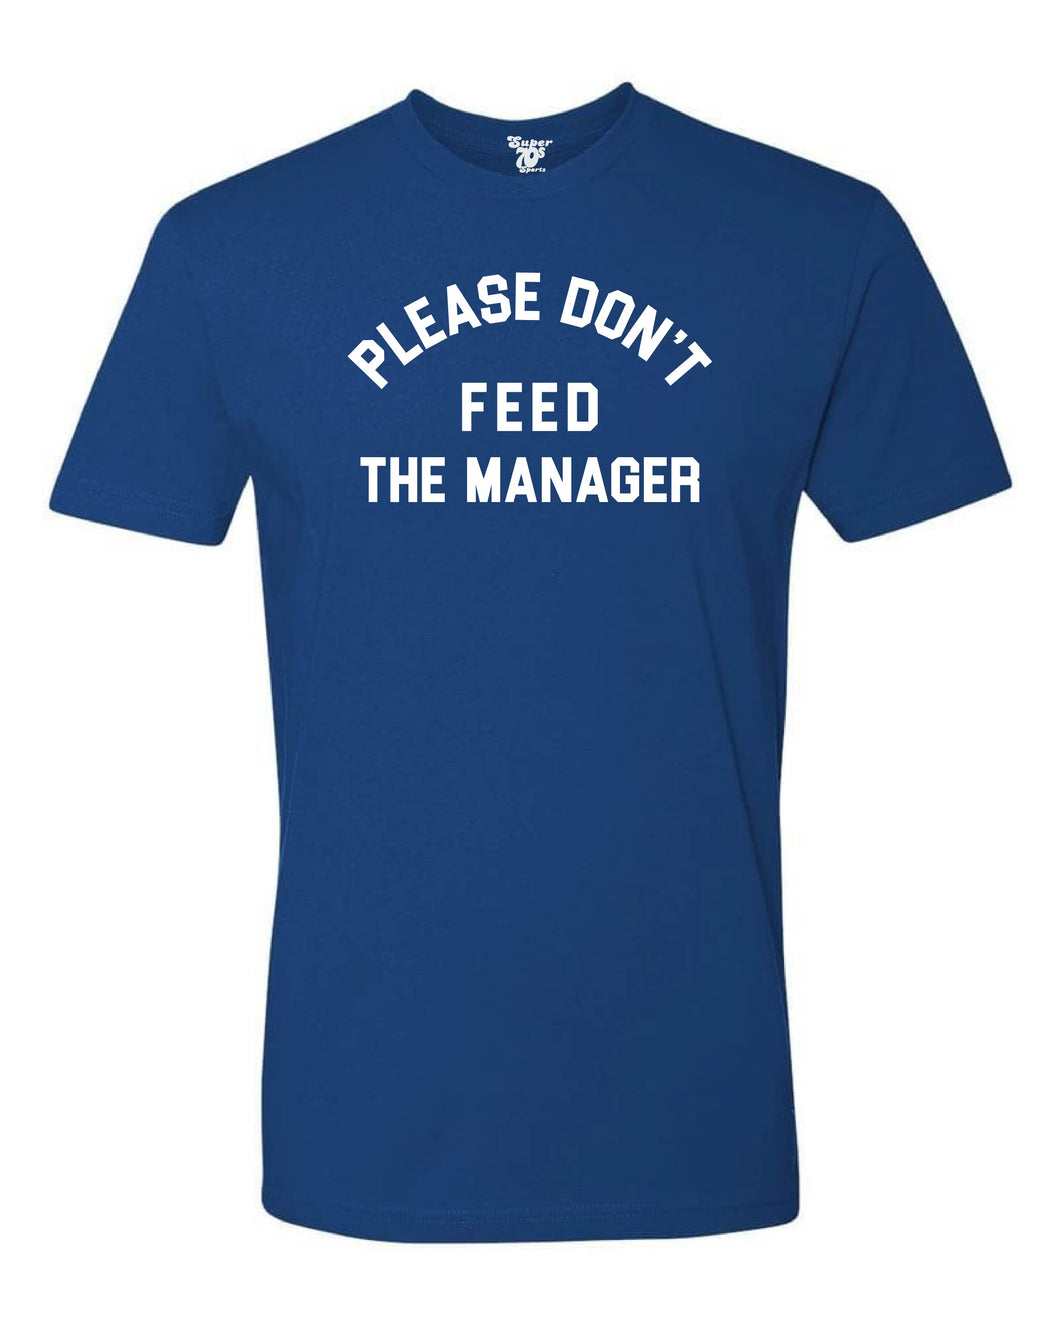 Please Don't Feed the Manager Tee